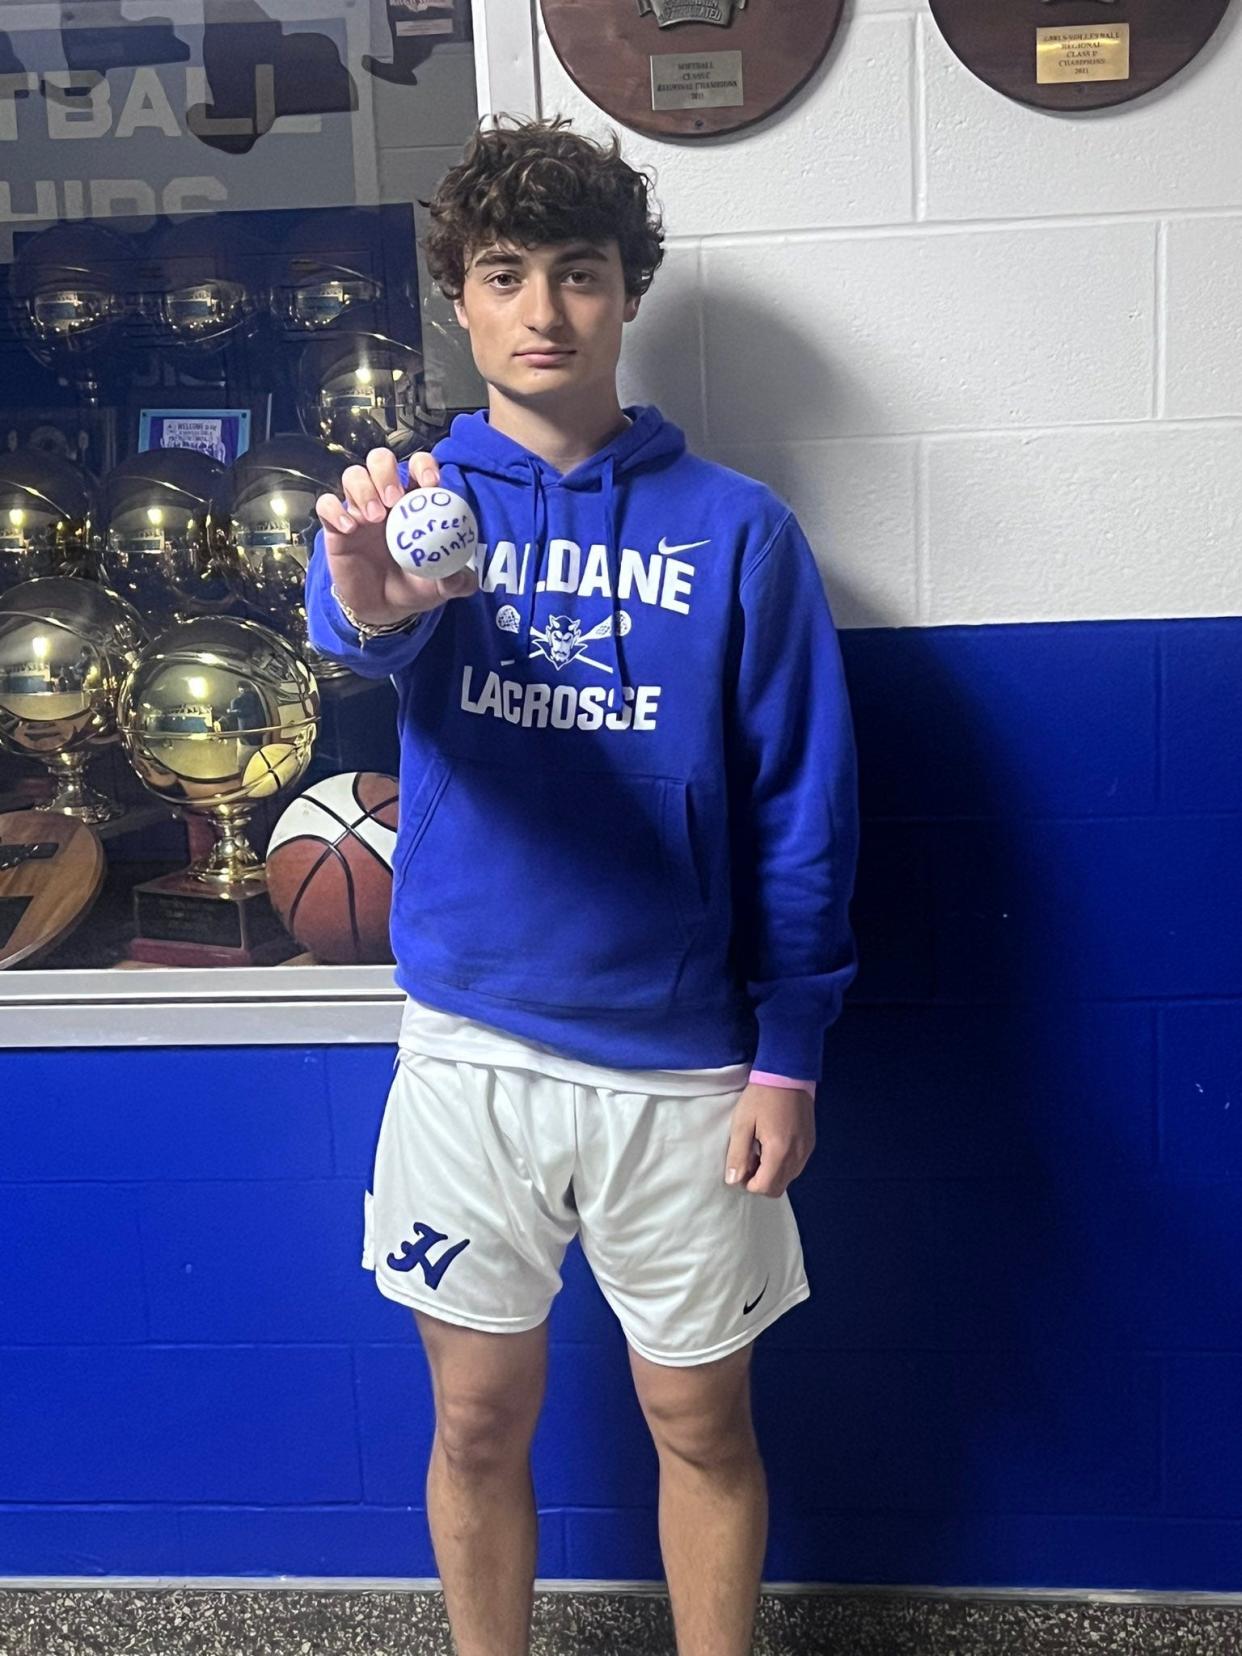 Haldane boys lacrosse player Liam Gaugler poses with the souvenir ball after scoring his 100th career point in the Blue Devils' win on April 22, 2023.